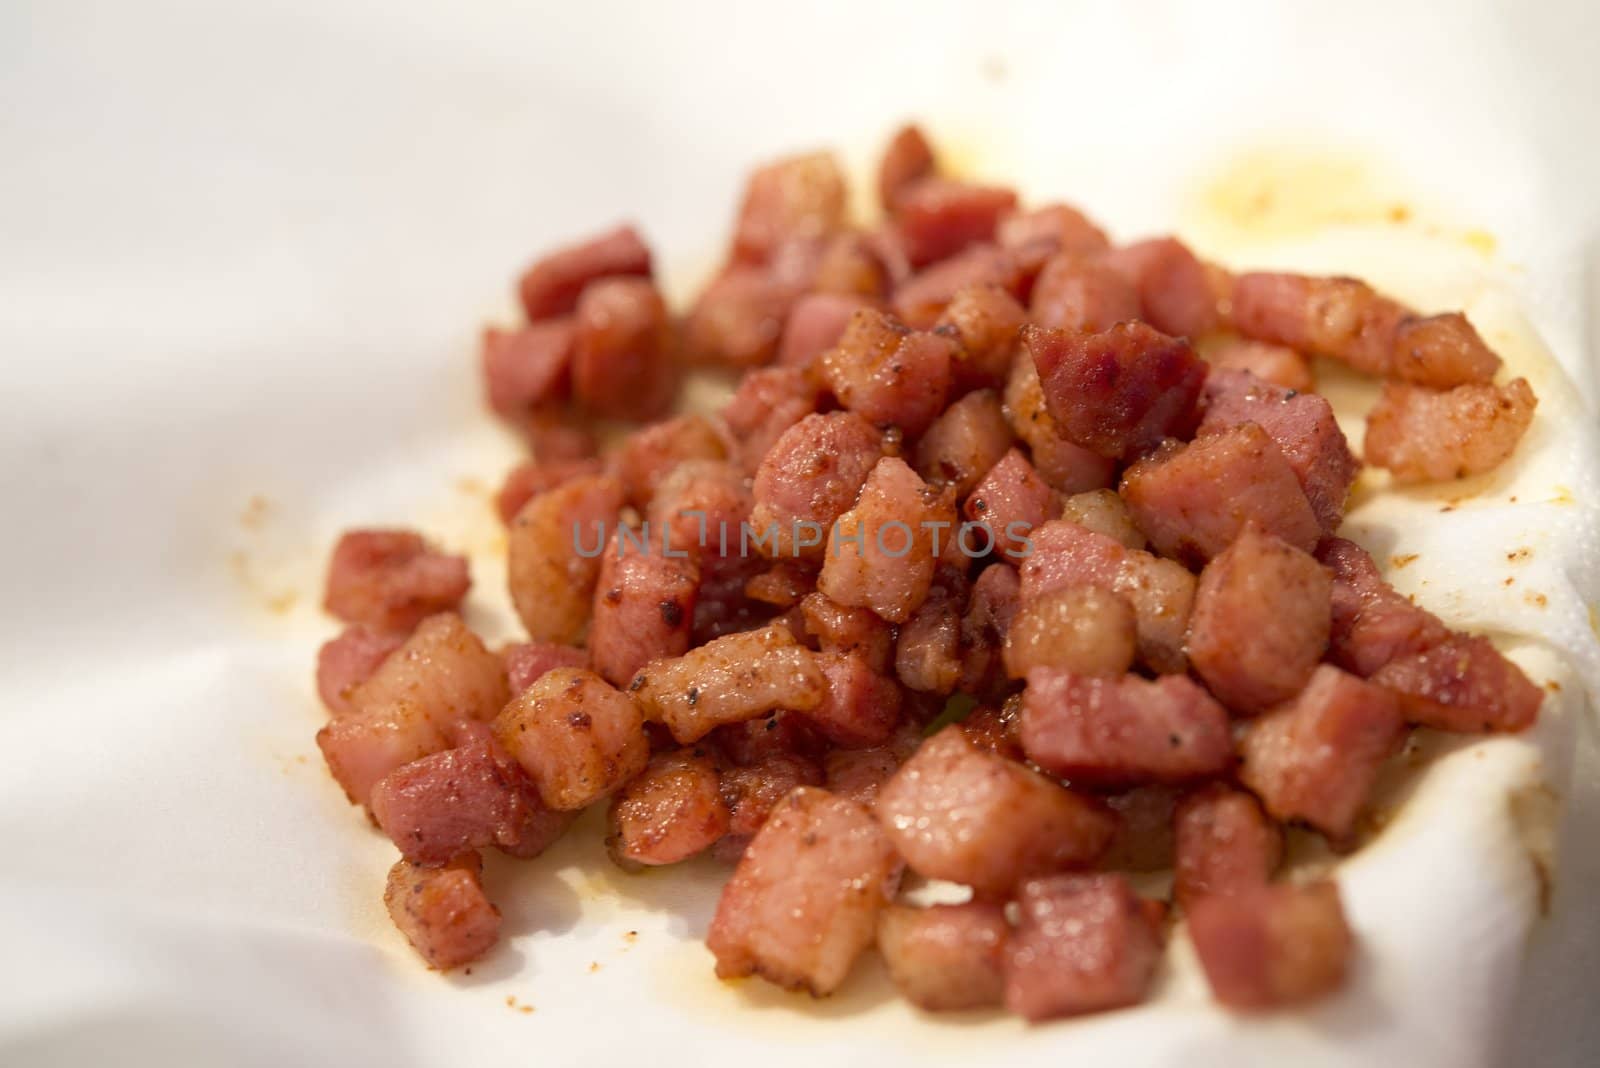 Pancetta bacon in a non-stick frying pan